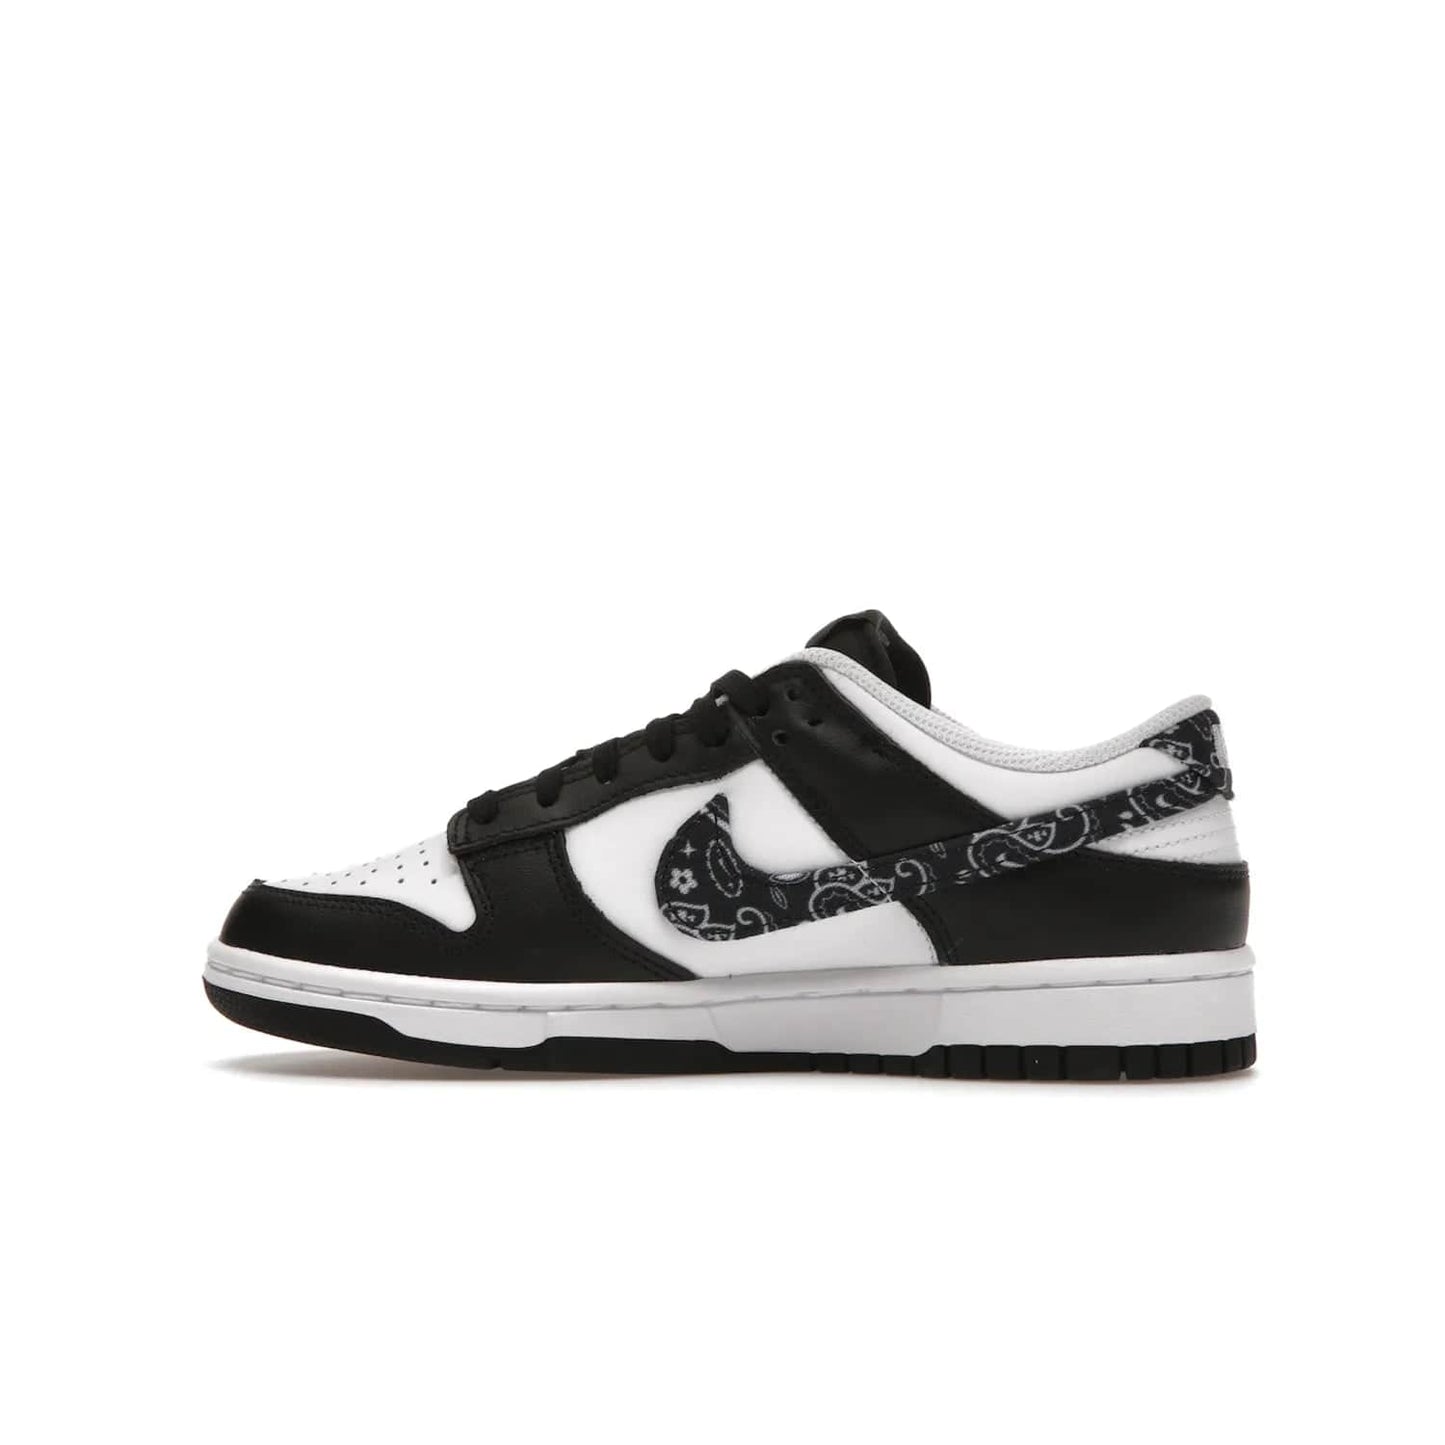 Nike Dunk Low Essential Paisley Pack Black (Women's) - Image 20 - Only at www.BallersClubKickz.com - Make a statement with the all-black Nike Dunk Low Essential Paisley Pack Black (Women's) featuring white leather overlays, a stunning paisley bandana print, and a white midsole for comfort and optimal grip on any surface.